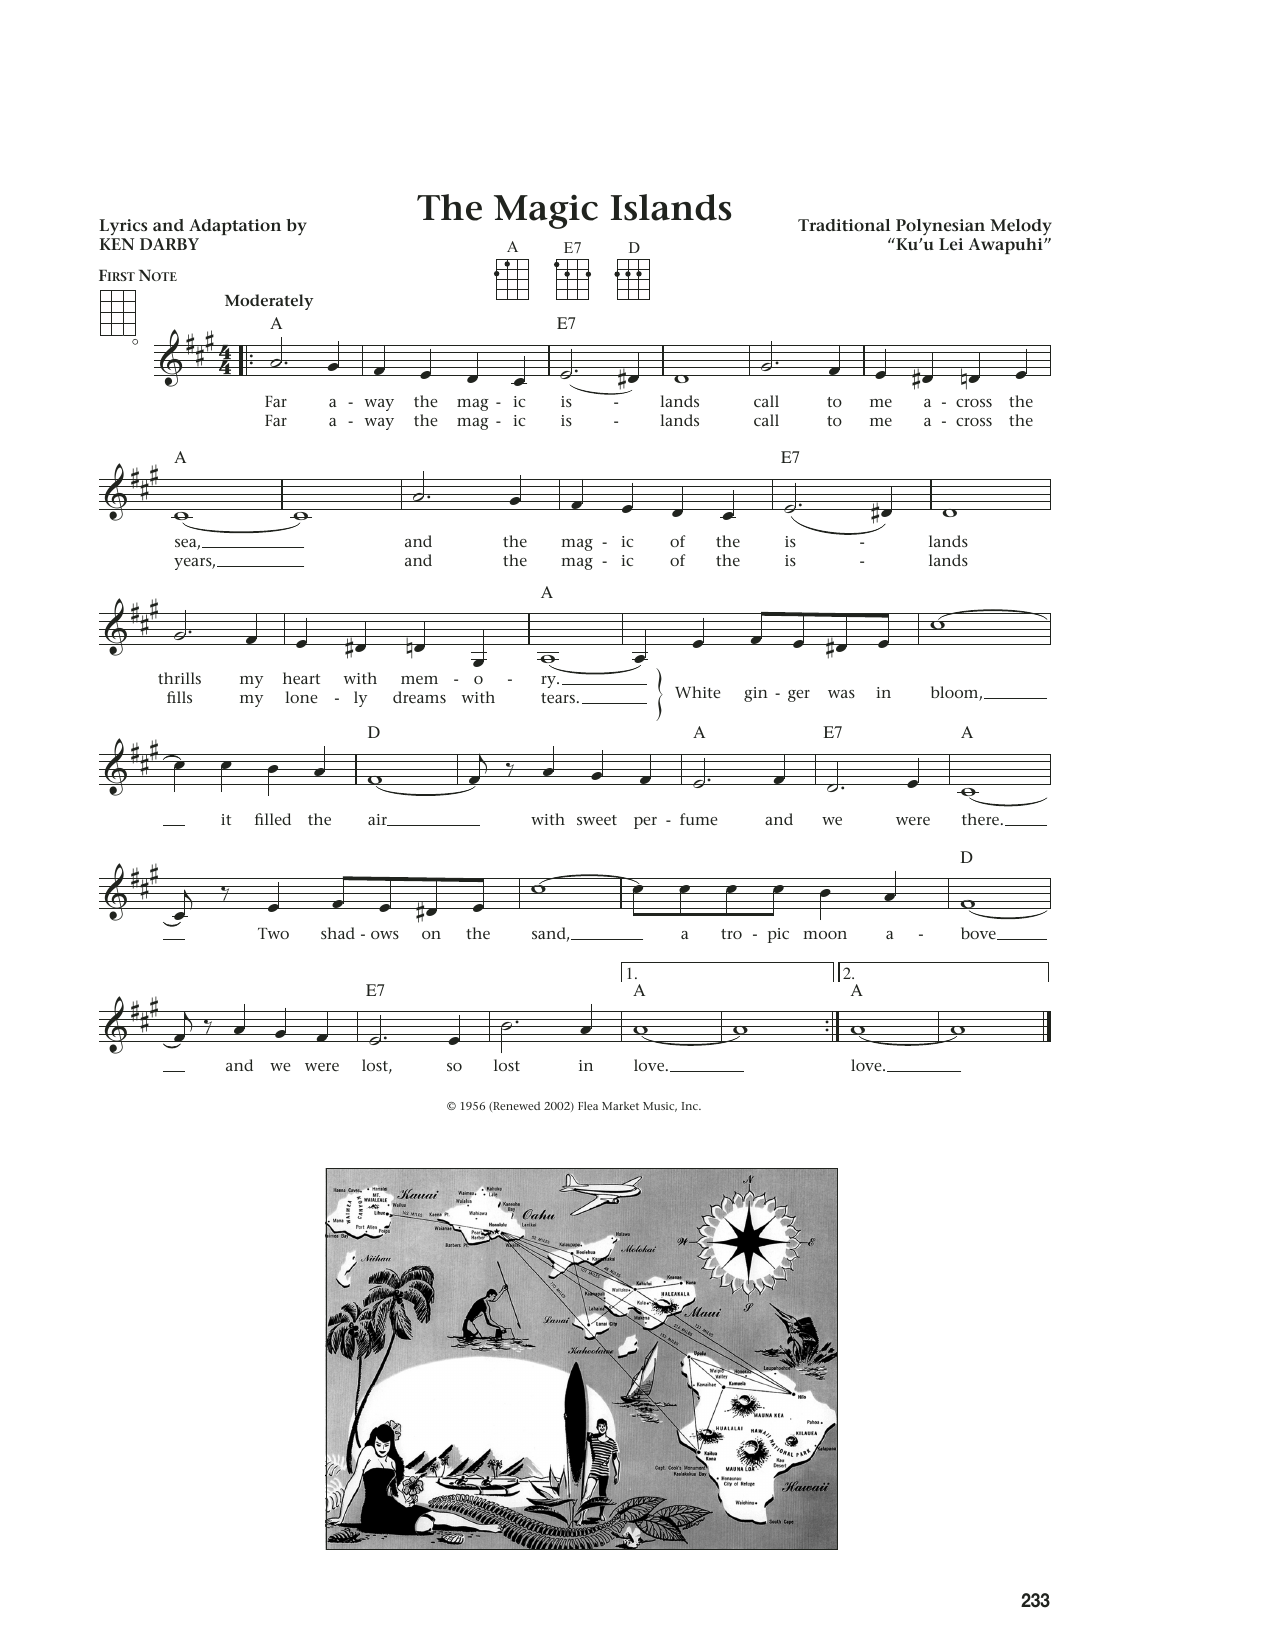 Download Ken Darby The Magic Islands (from The Daily Ukule Sheet Music